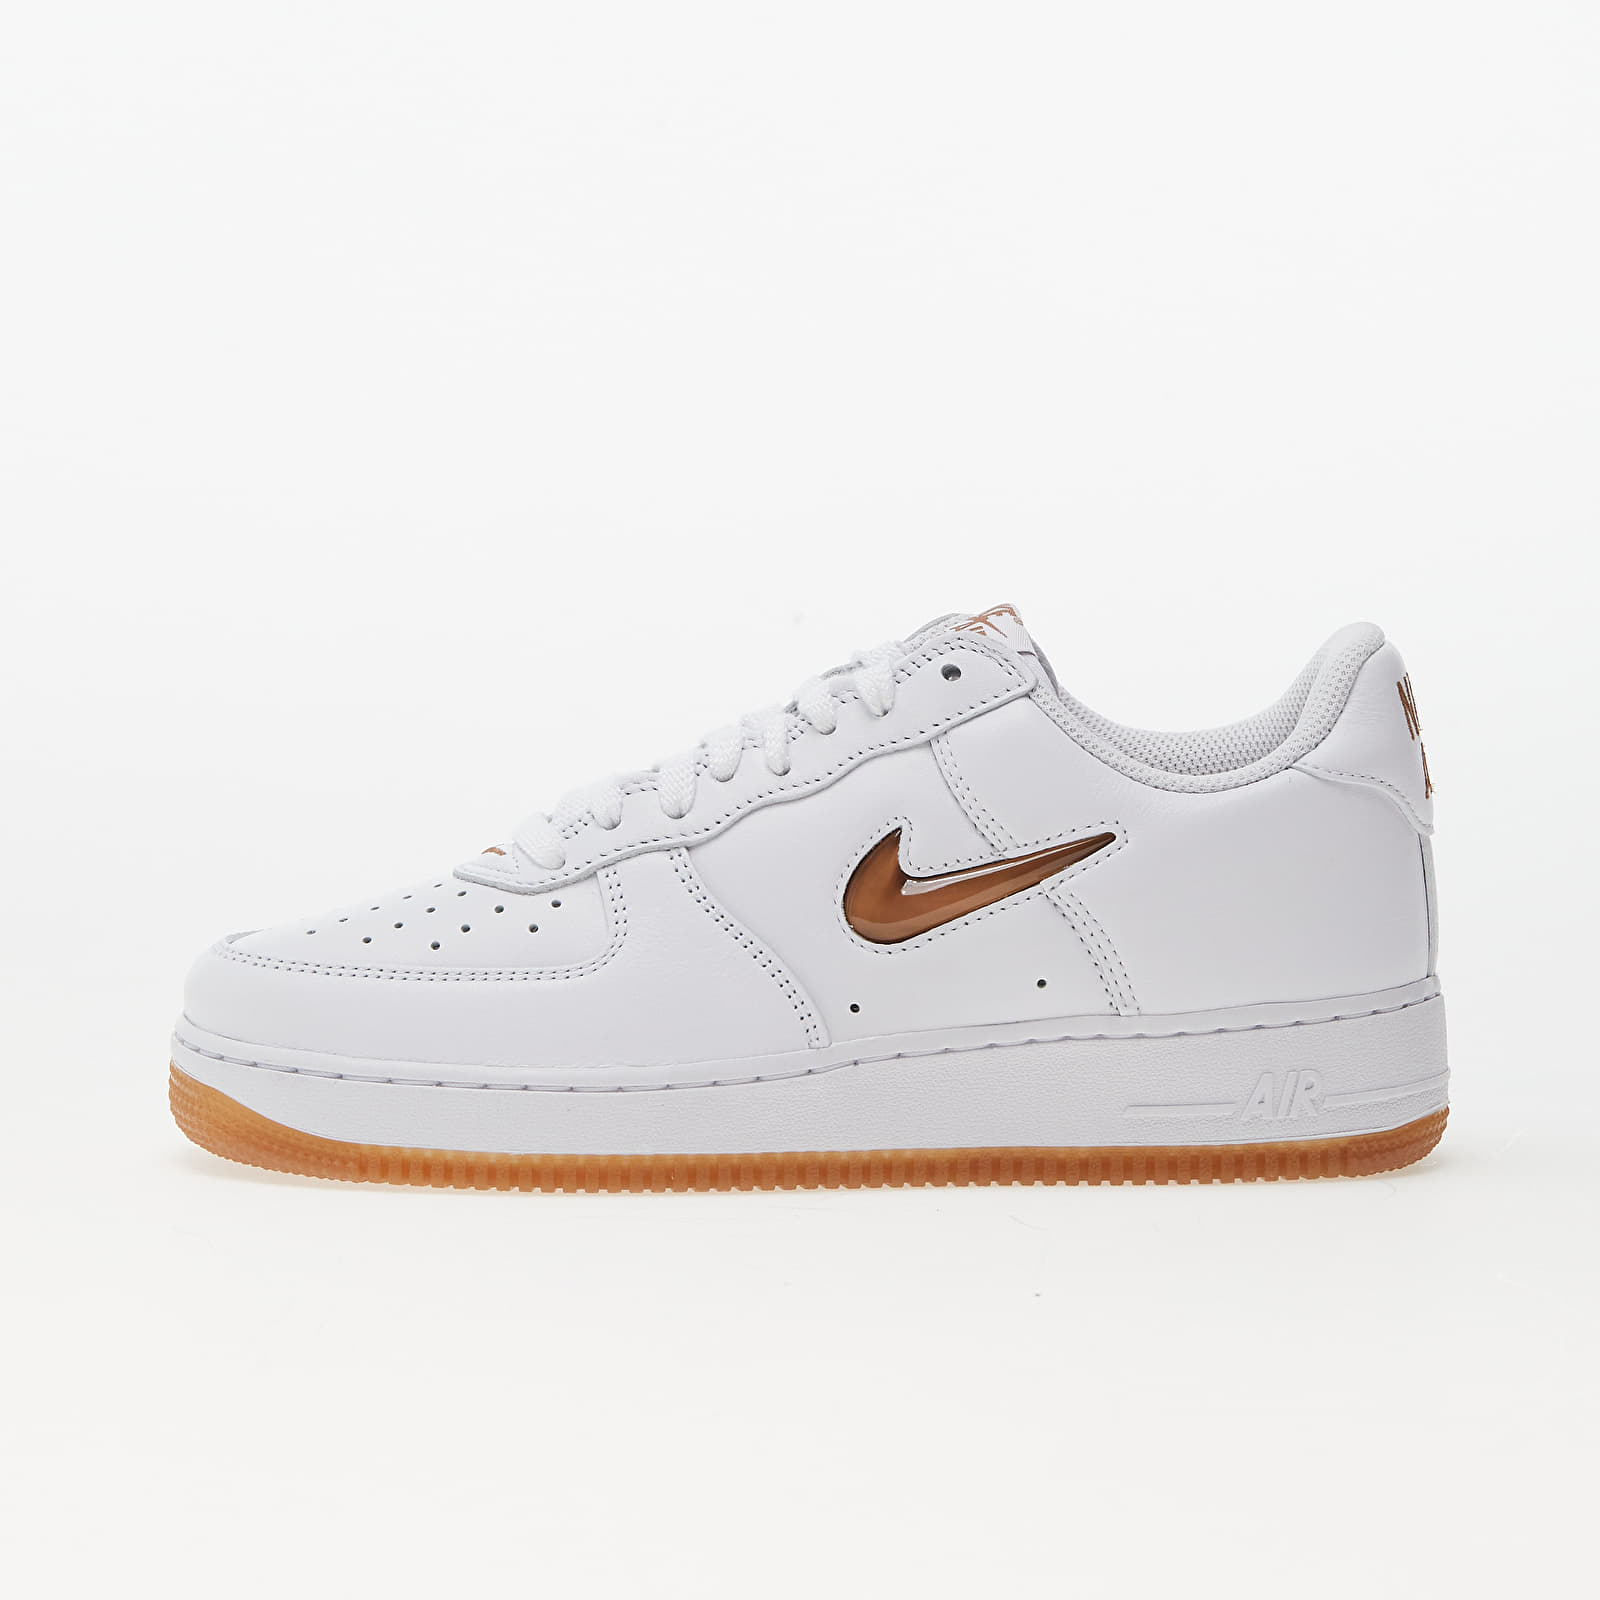 Chaussures et baskets homme Nike Air Force 1 Low Retro White/ Gum Med Brown